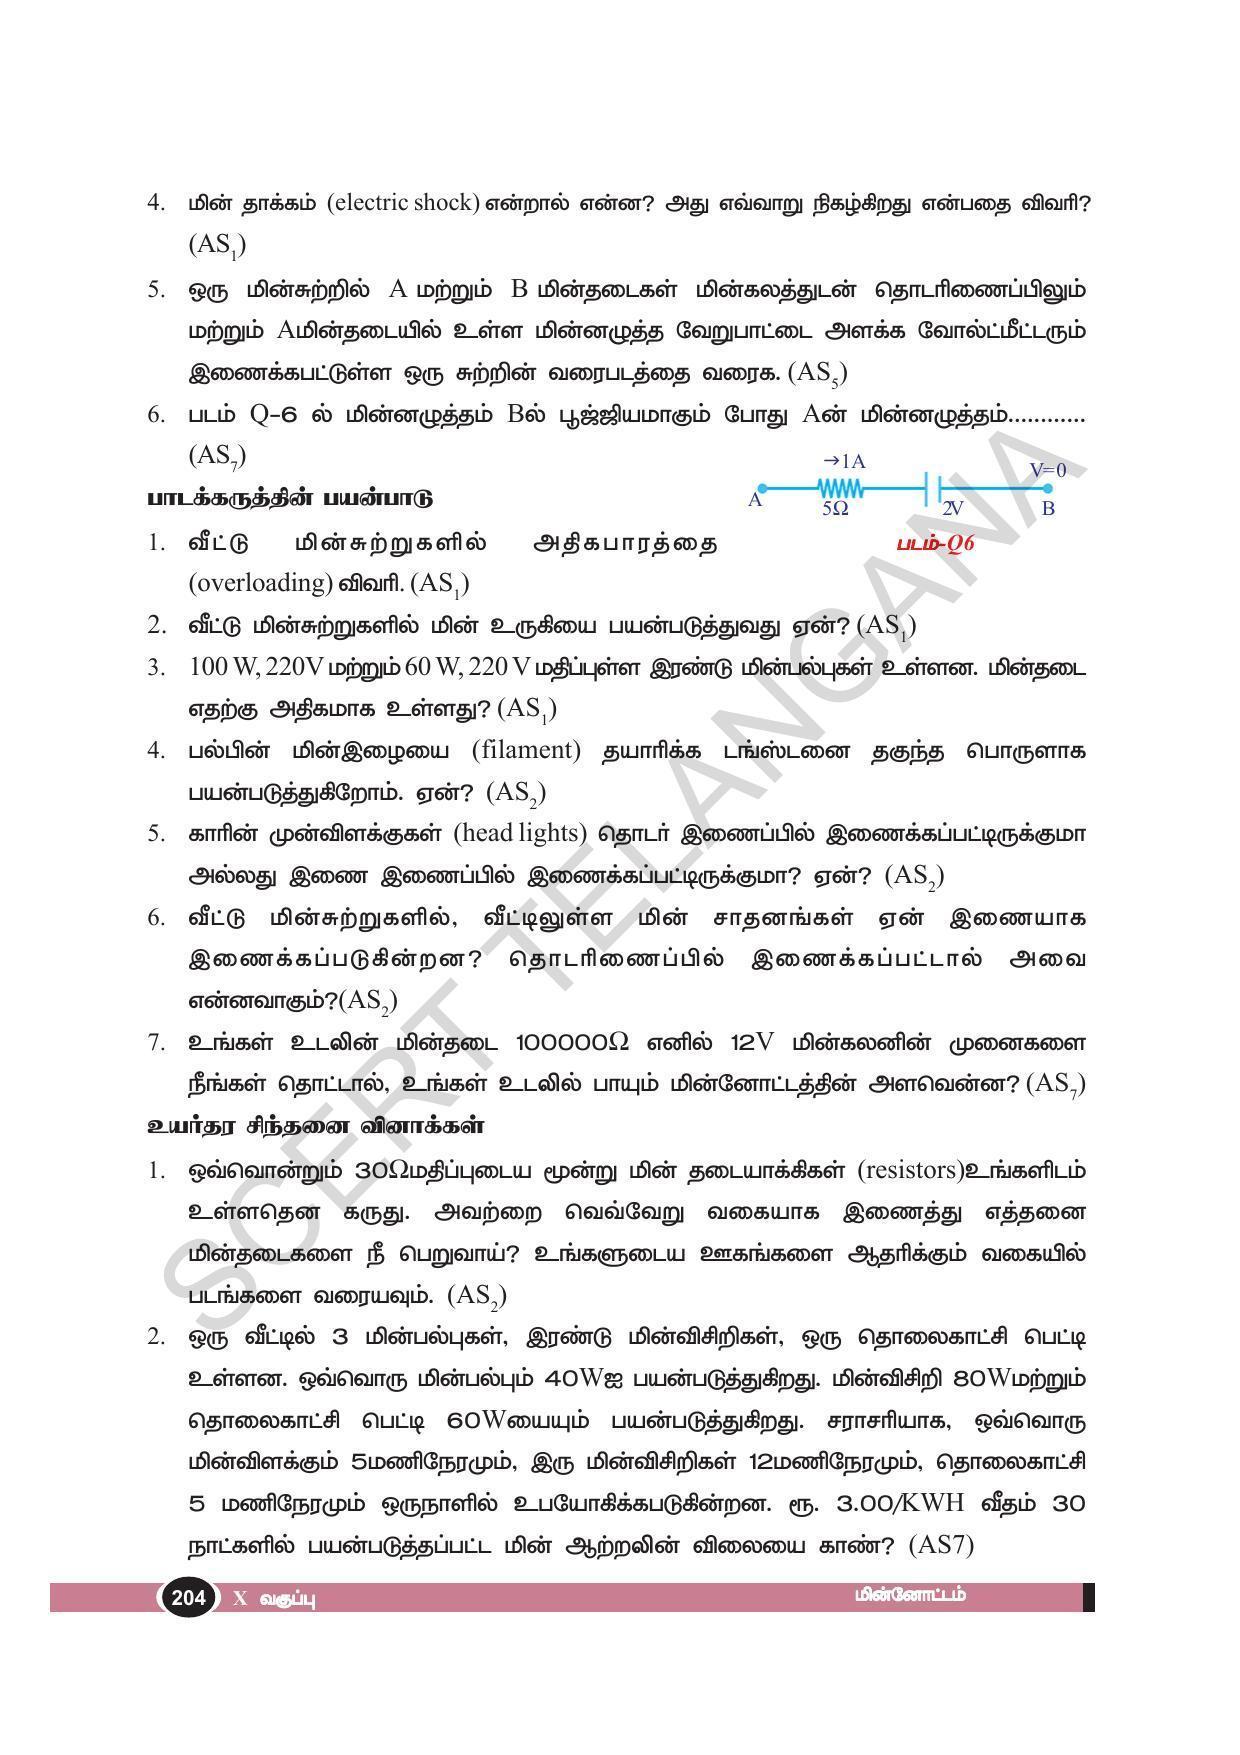 TS SCERT Class 10 Physical Science(Tamil Medium) Text Book - Page 216